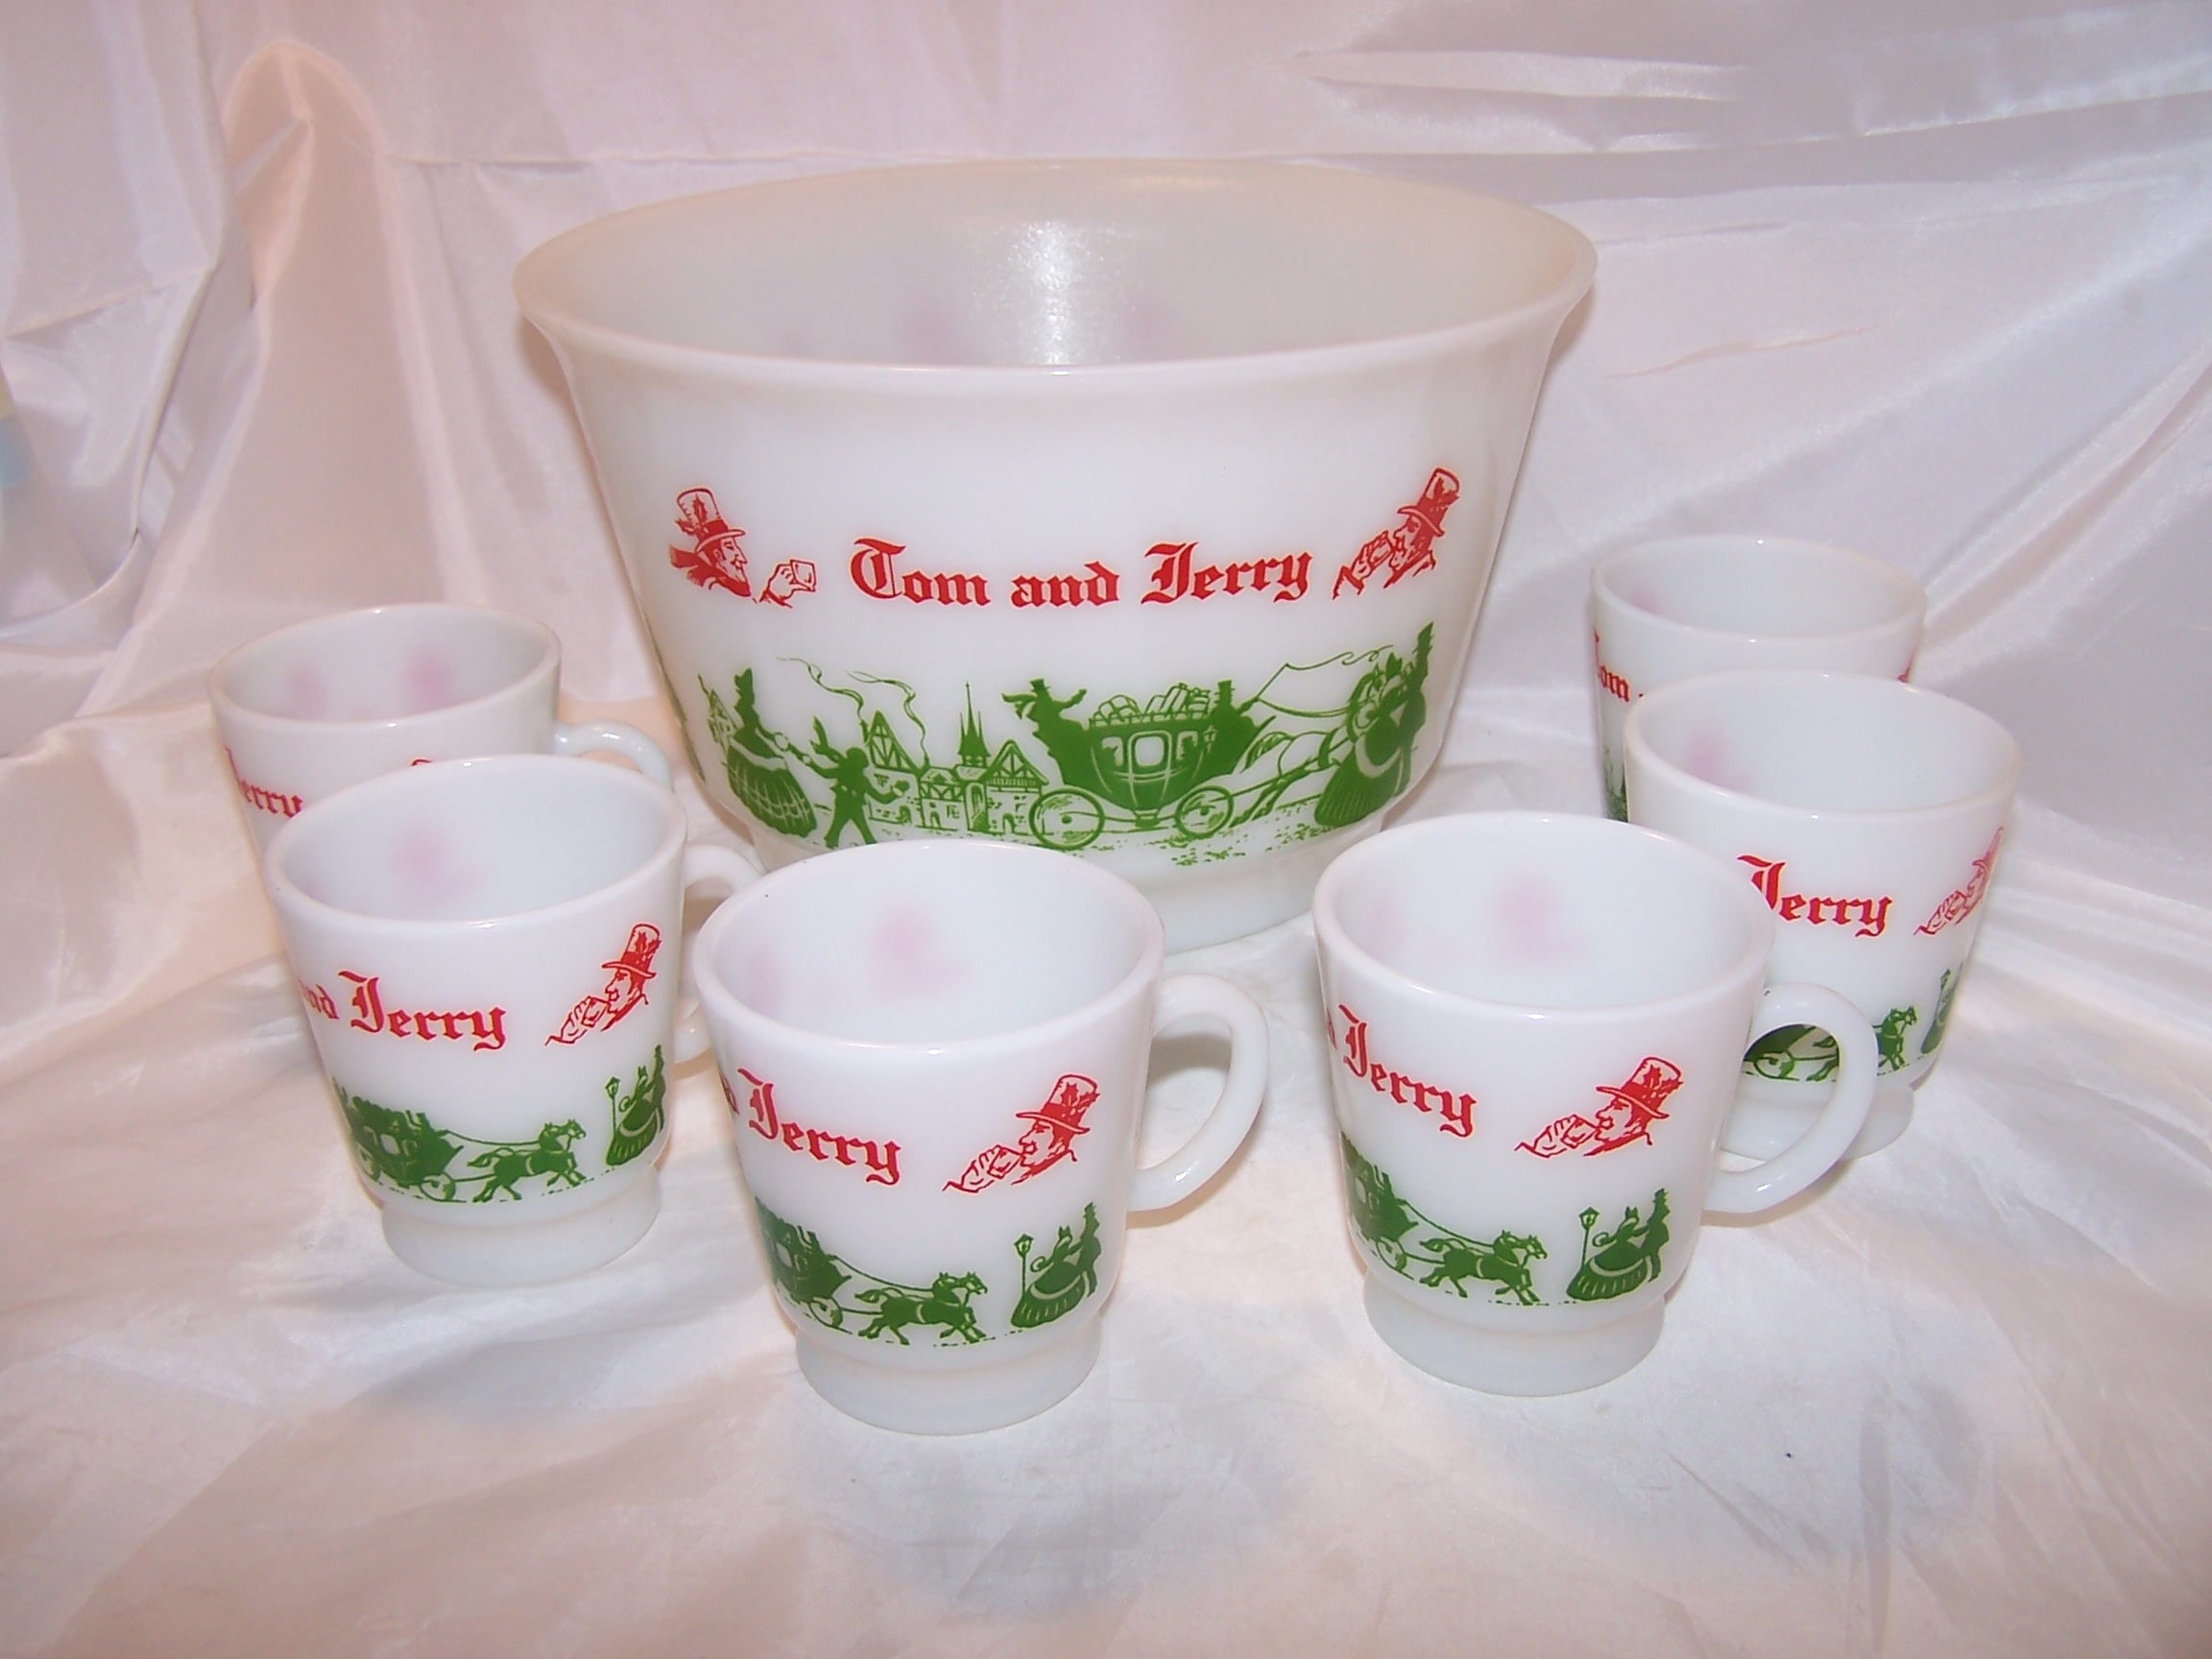 Tom and Jerry Punch Bowl, Mugs